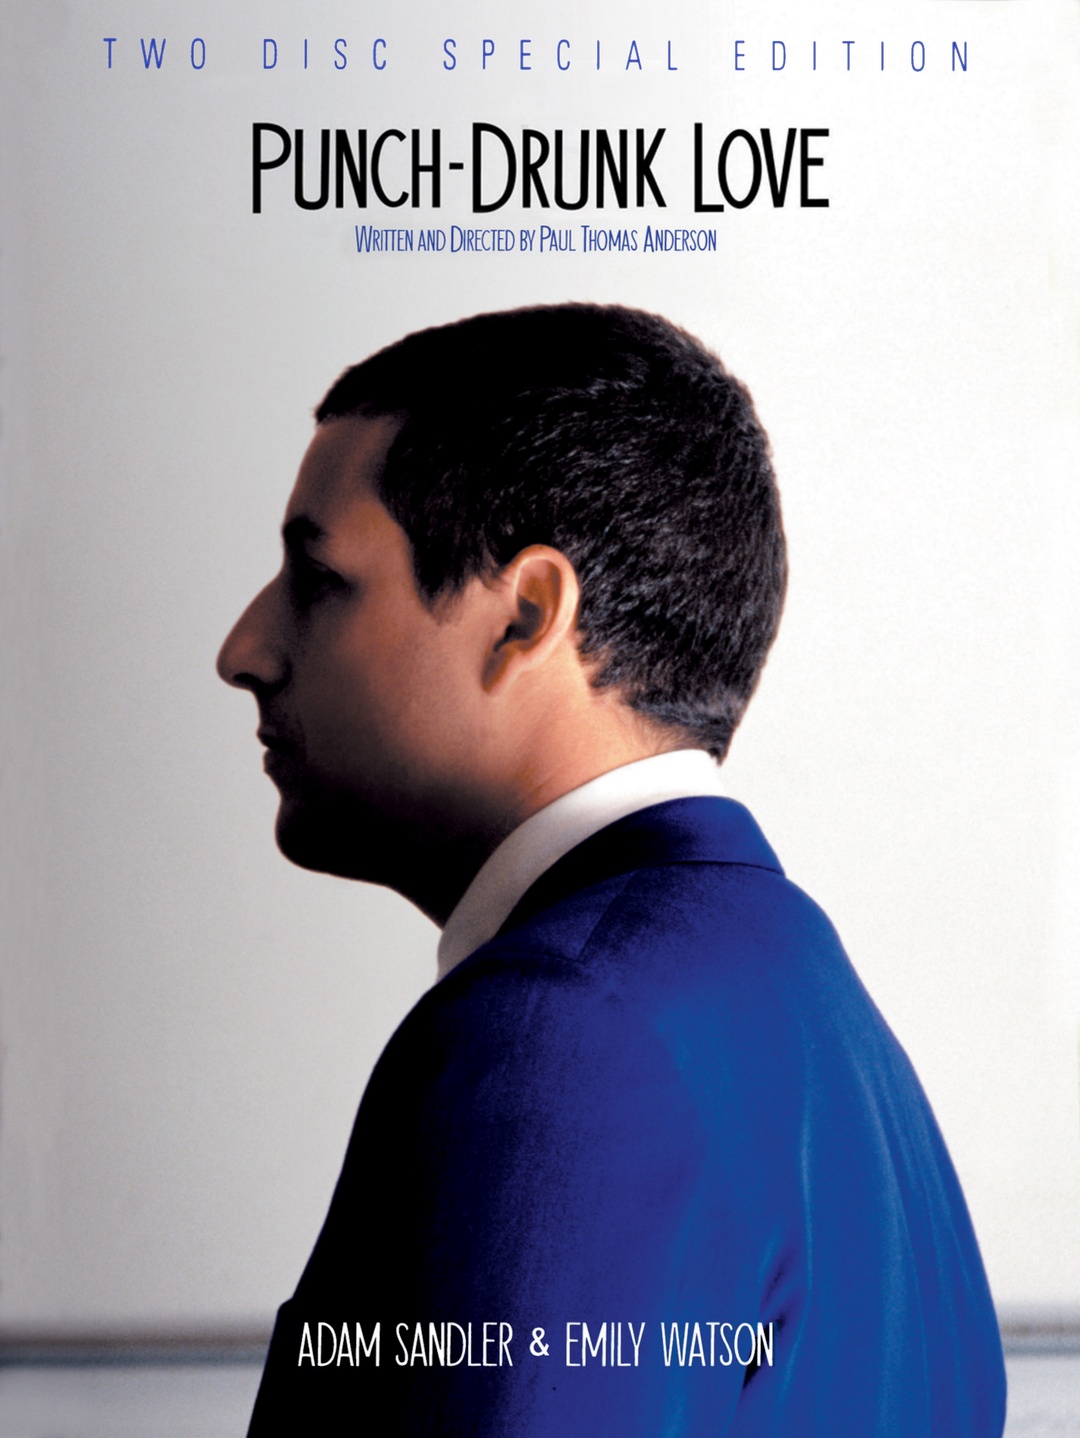 Punch-Drunk Love: Deleted Scenes - Blossoms & Blood